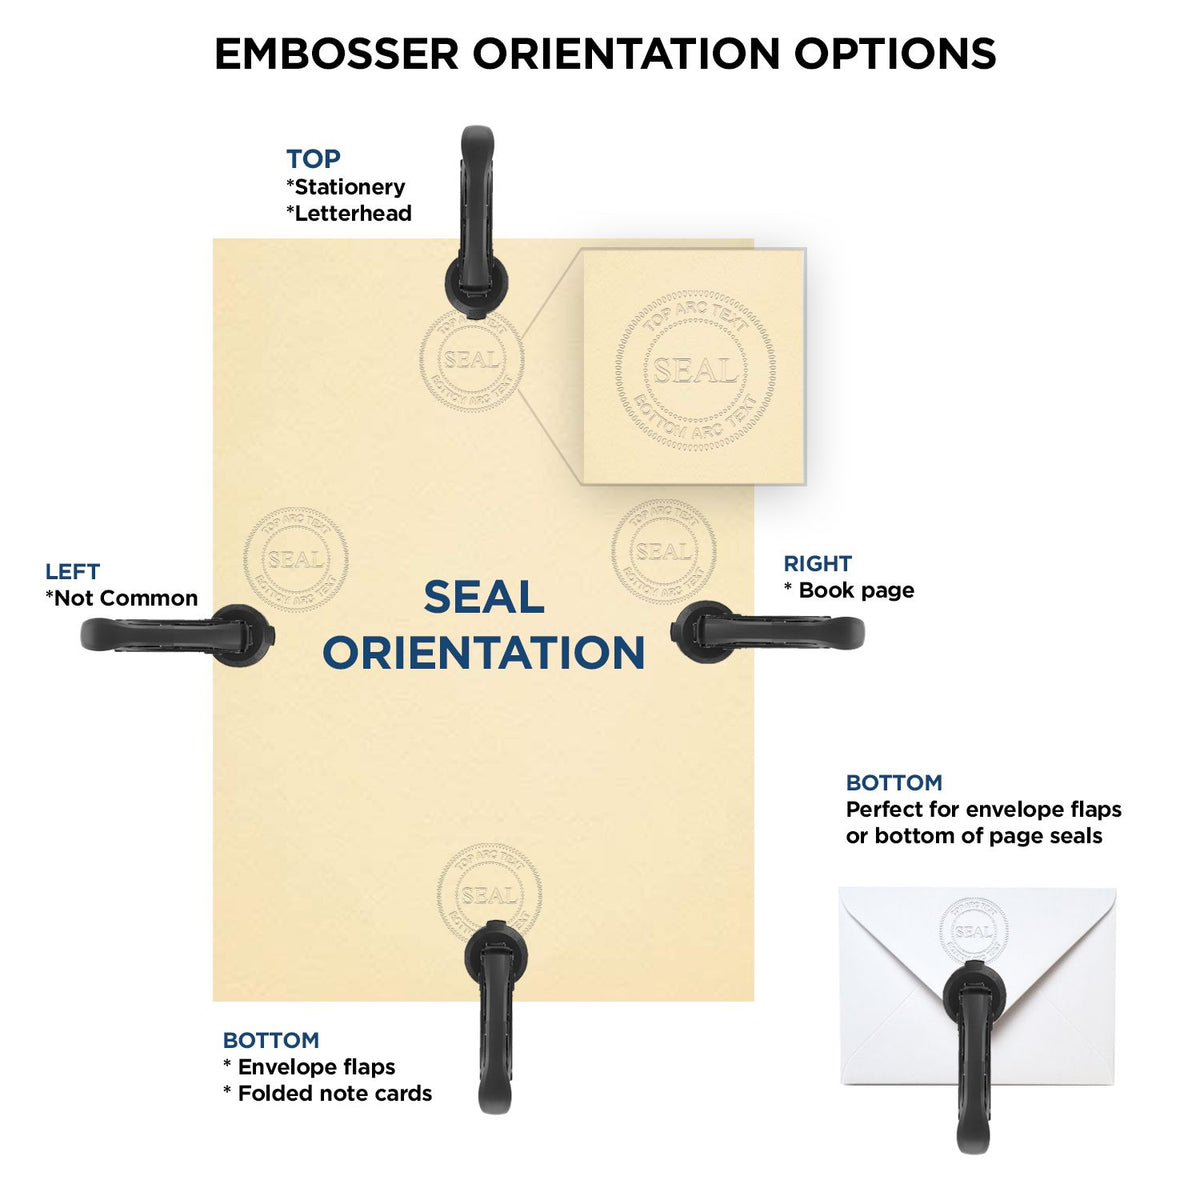 An infographic for the Handheld Alaska Land Surveyor Seal showing embosser orientation, this is showing examples of a top, bottom, right and left insert.